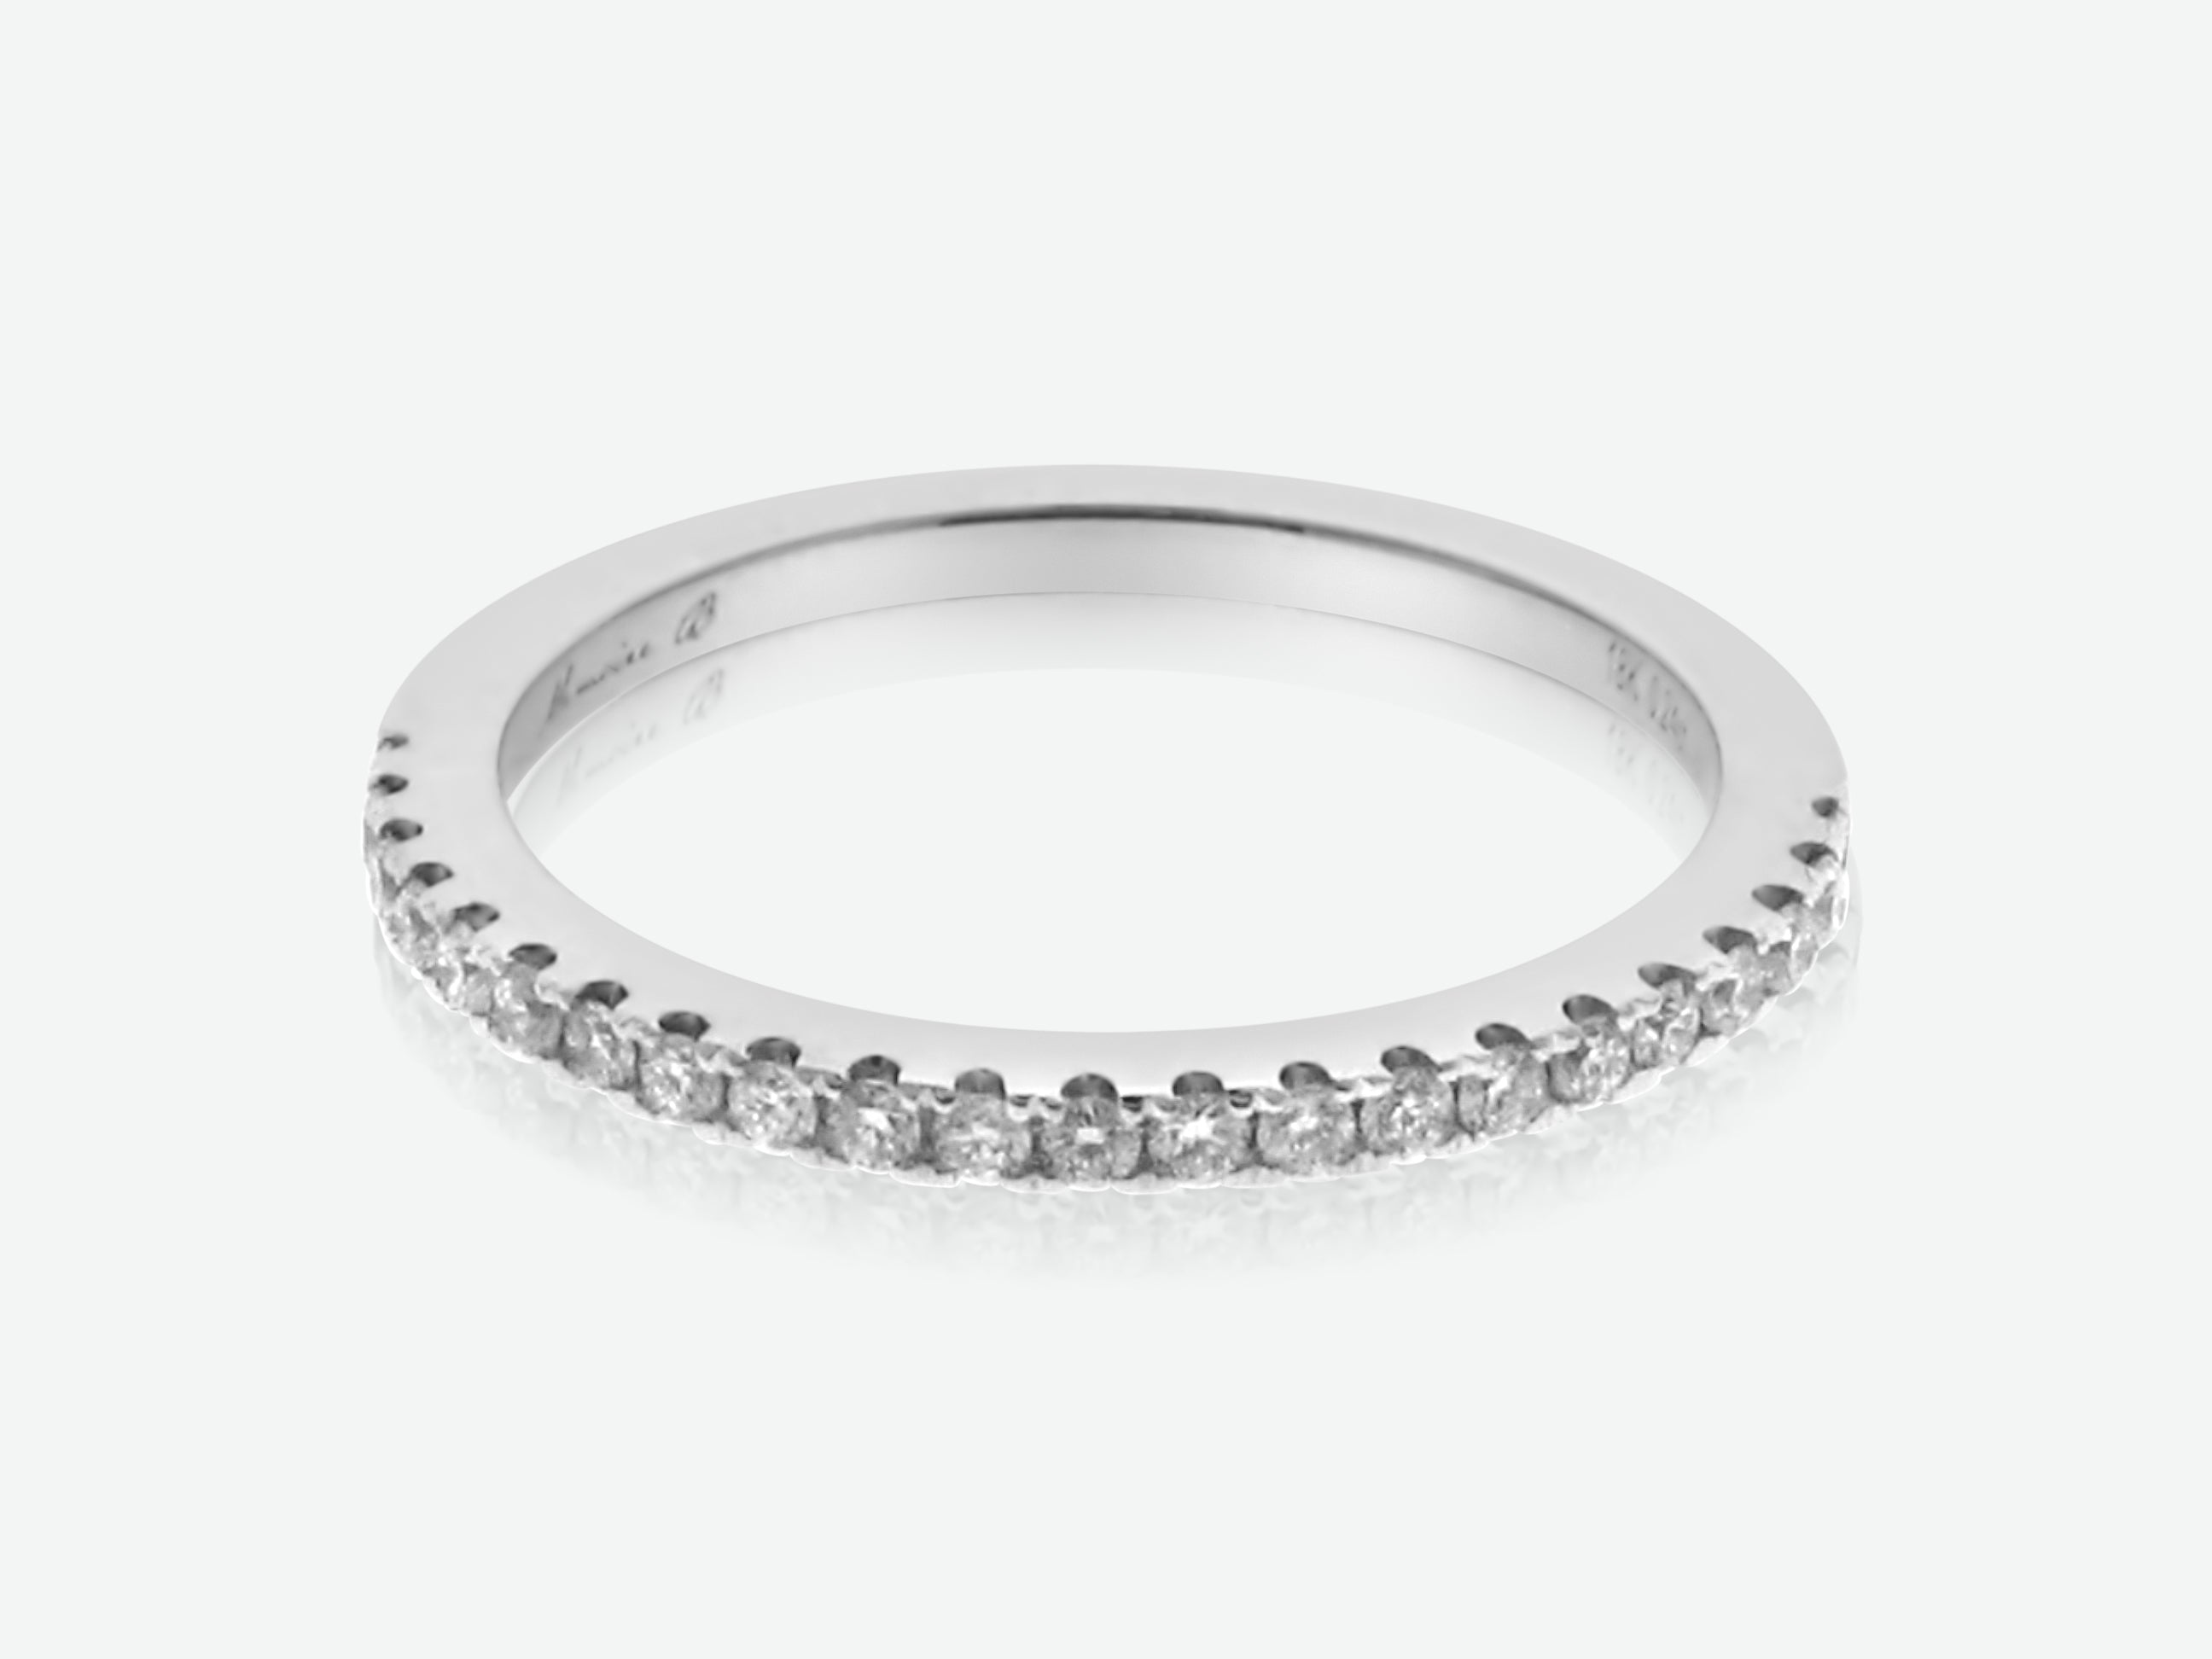 MEMOIRE 18K WHITE GOLD 0.25CT SI/G DIAMOND WEDDING RING FROM THE BOUQUET COLLECTION